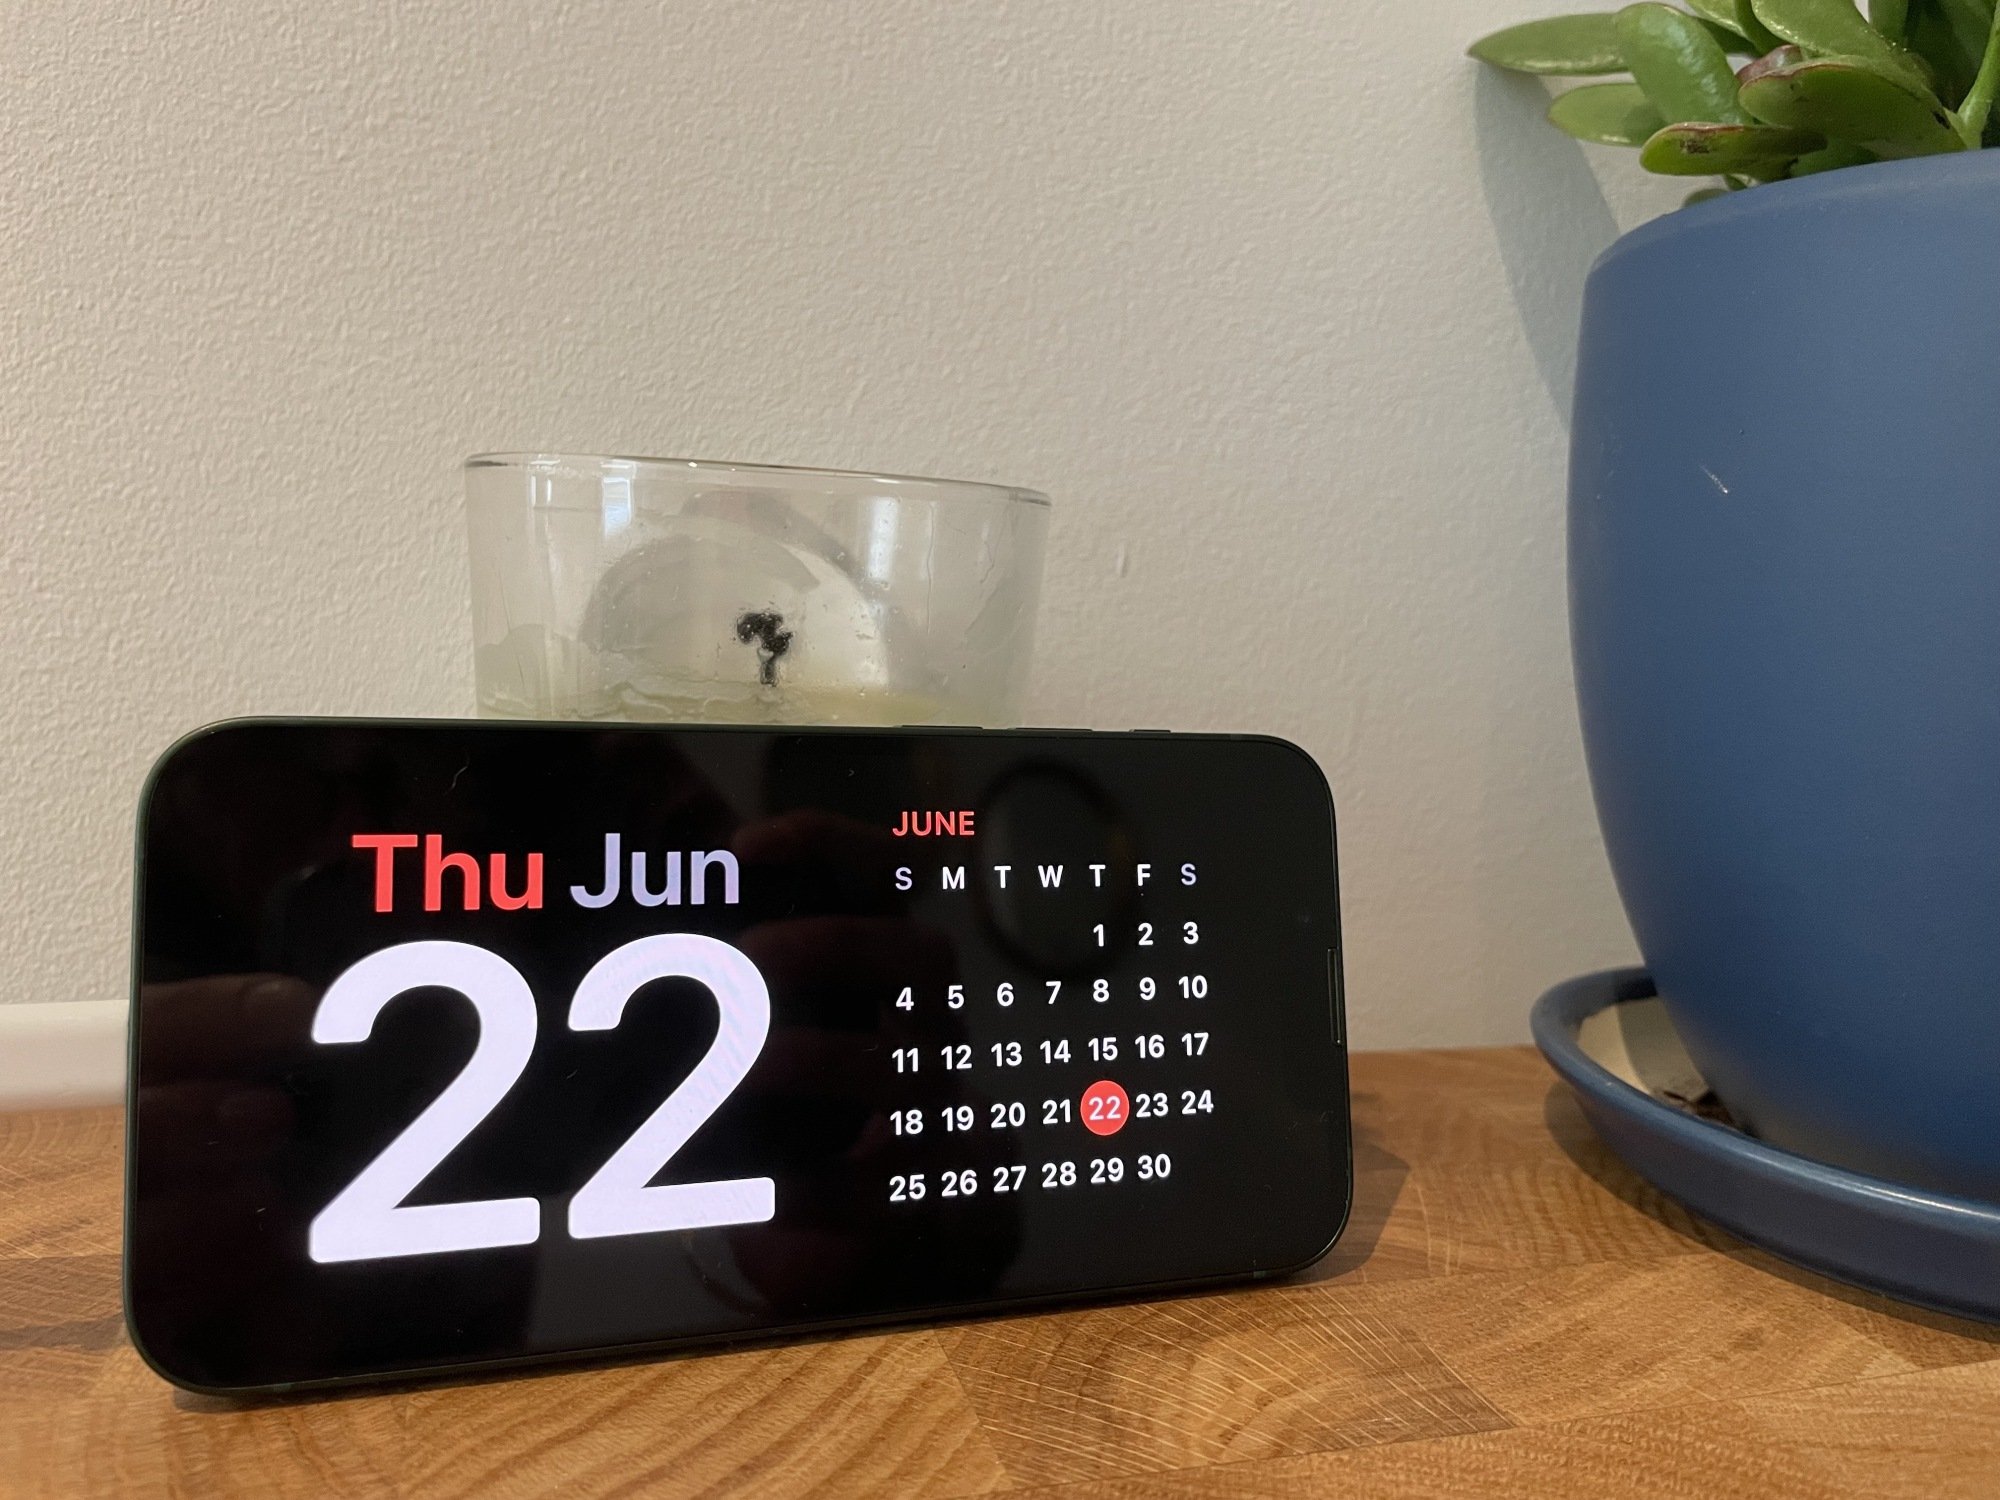 StandBy on iOS 17 showing the date and calendar